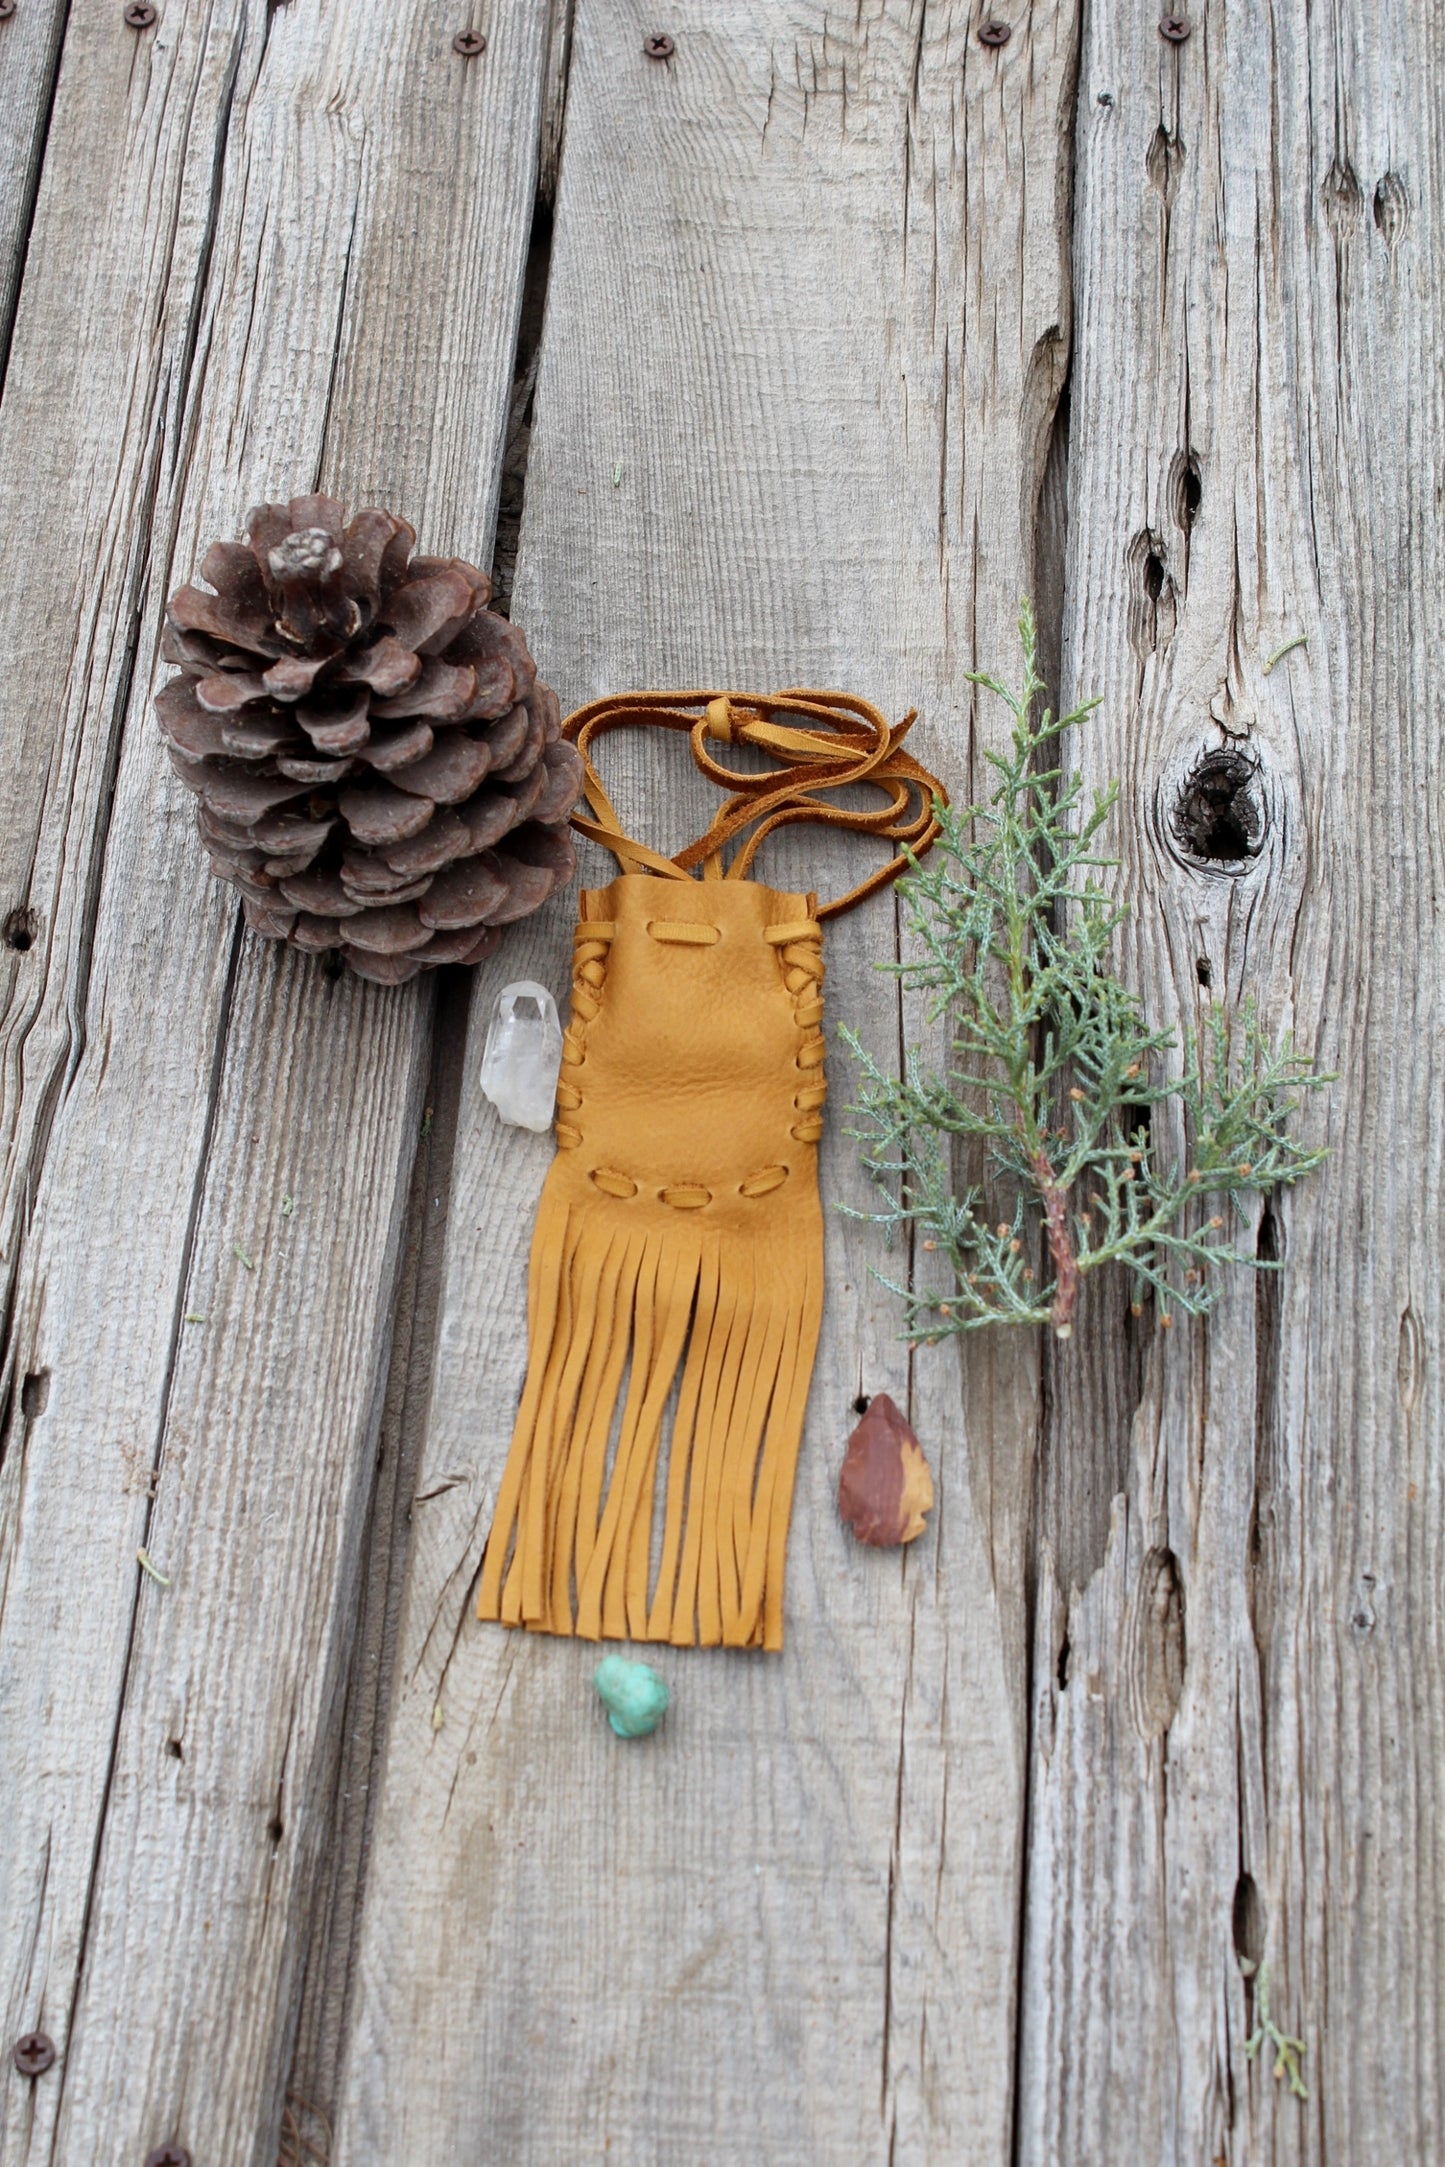 Fringed leather medicine bag, necklace amulet pouch